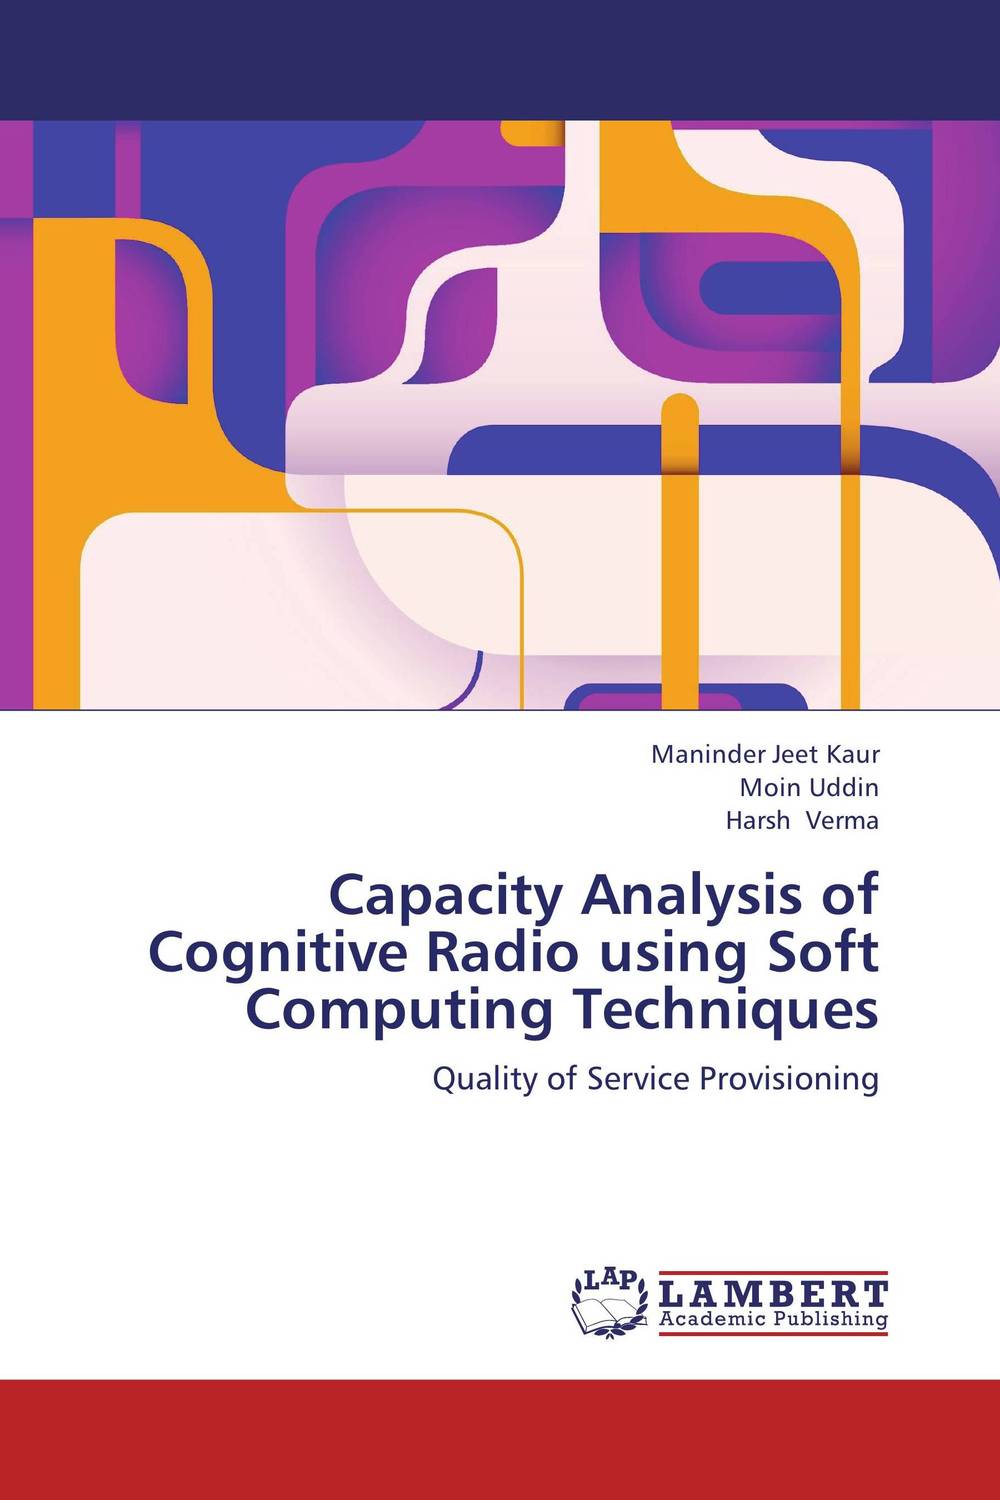 Capacity Analysis of Cognitive Radio using Soft Computing Techniques